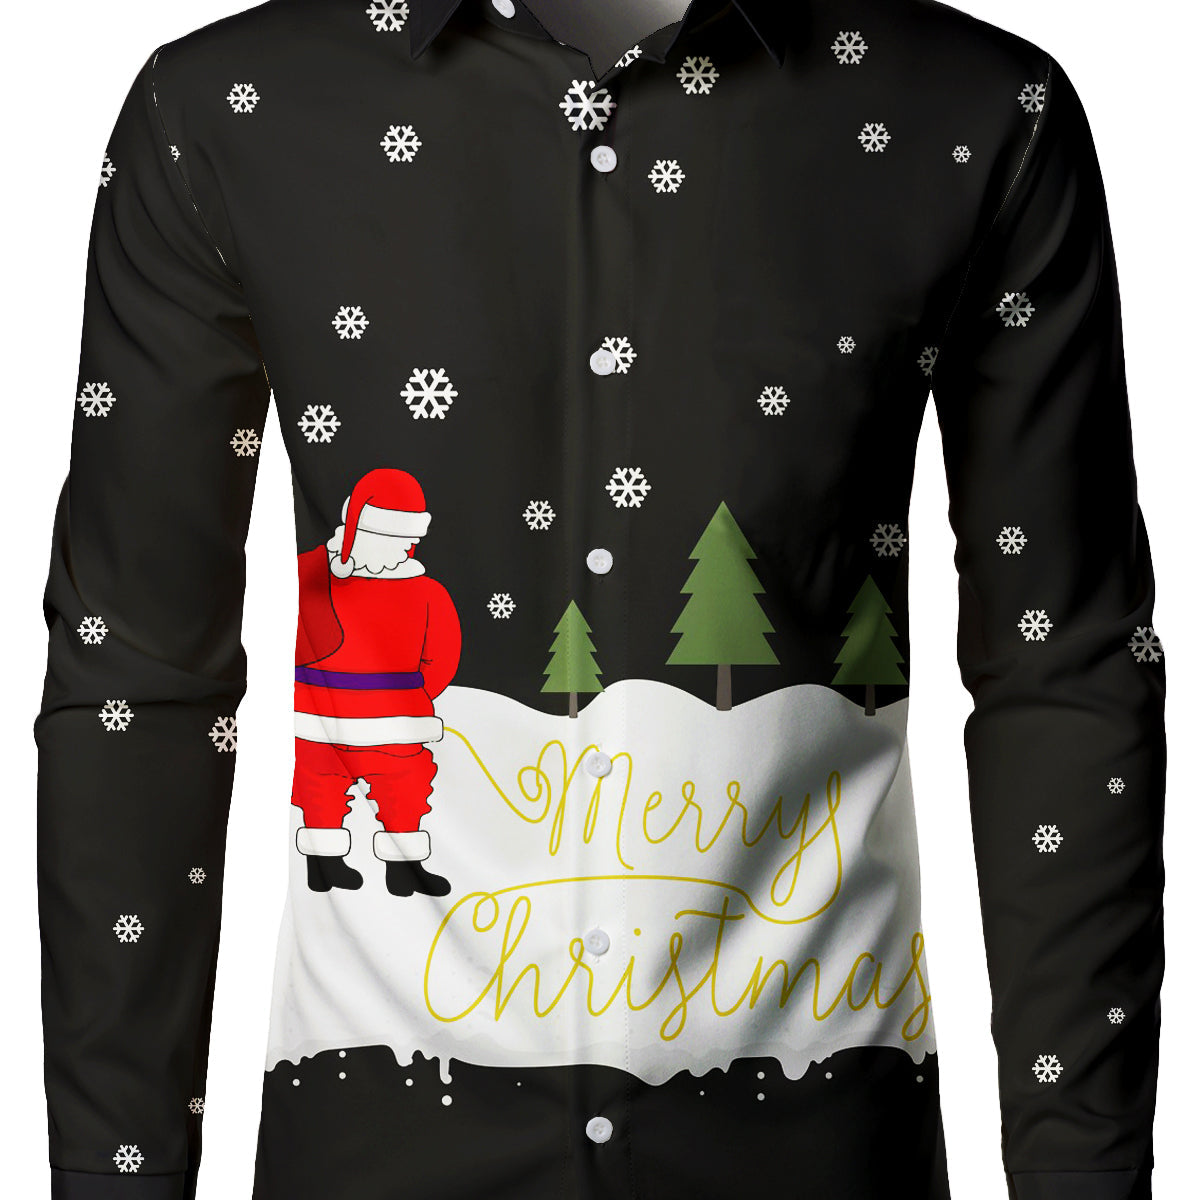 Men's Funny Santa Claus Piss Novelty Merry Christmas Black Long Sleeve Ugly Button Up Shirt